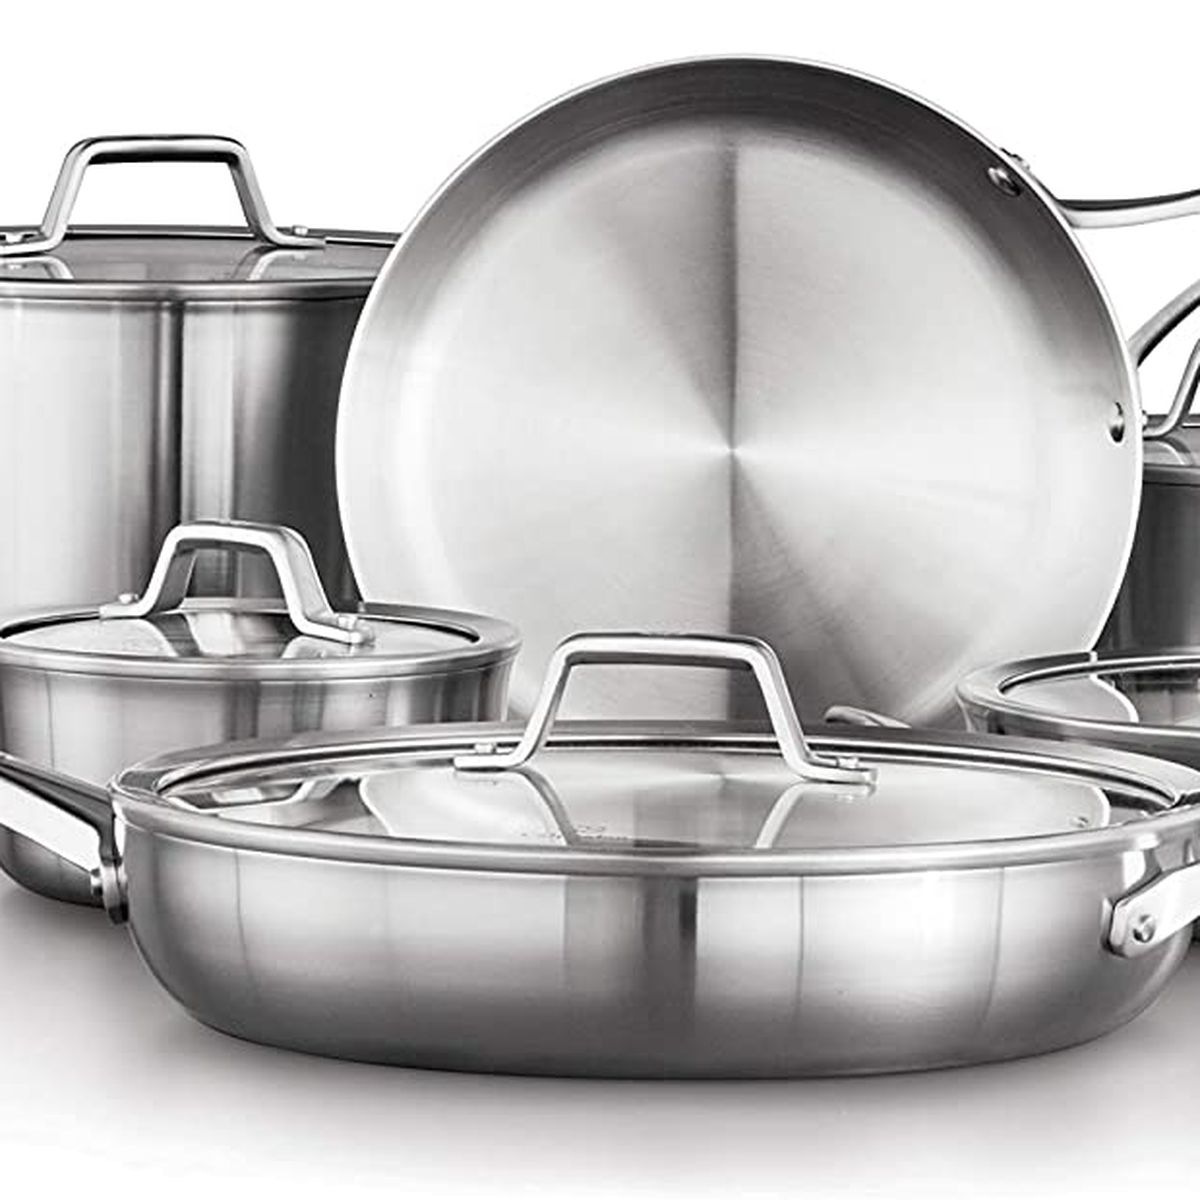 A set of stainless steel pots and pans